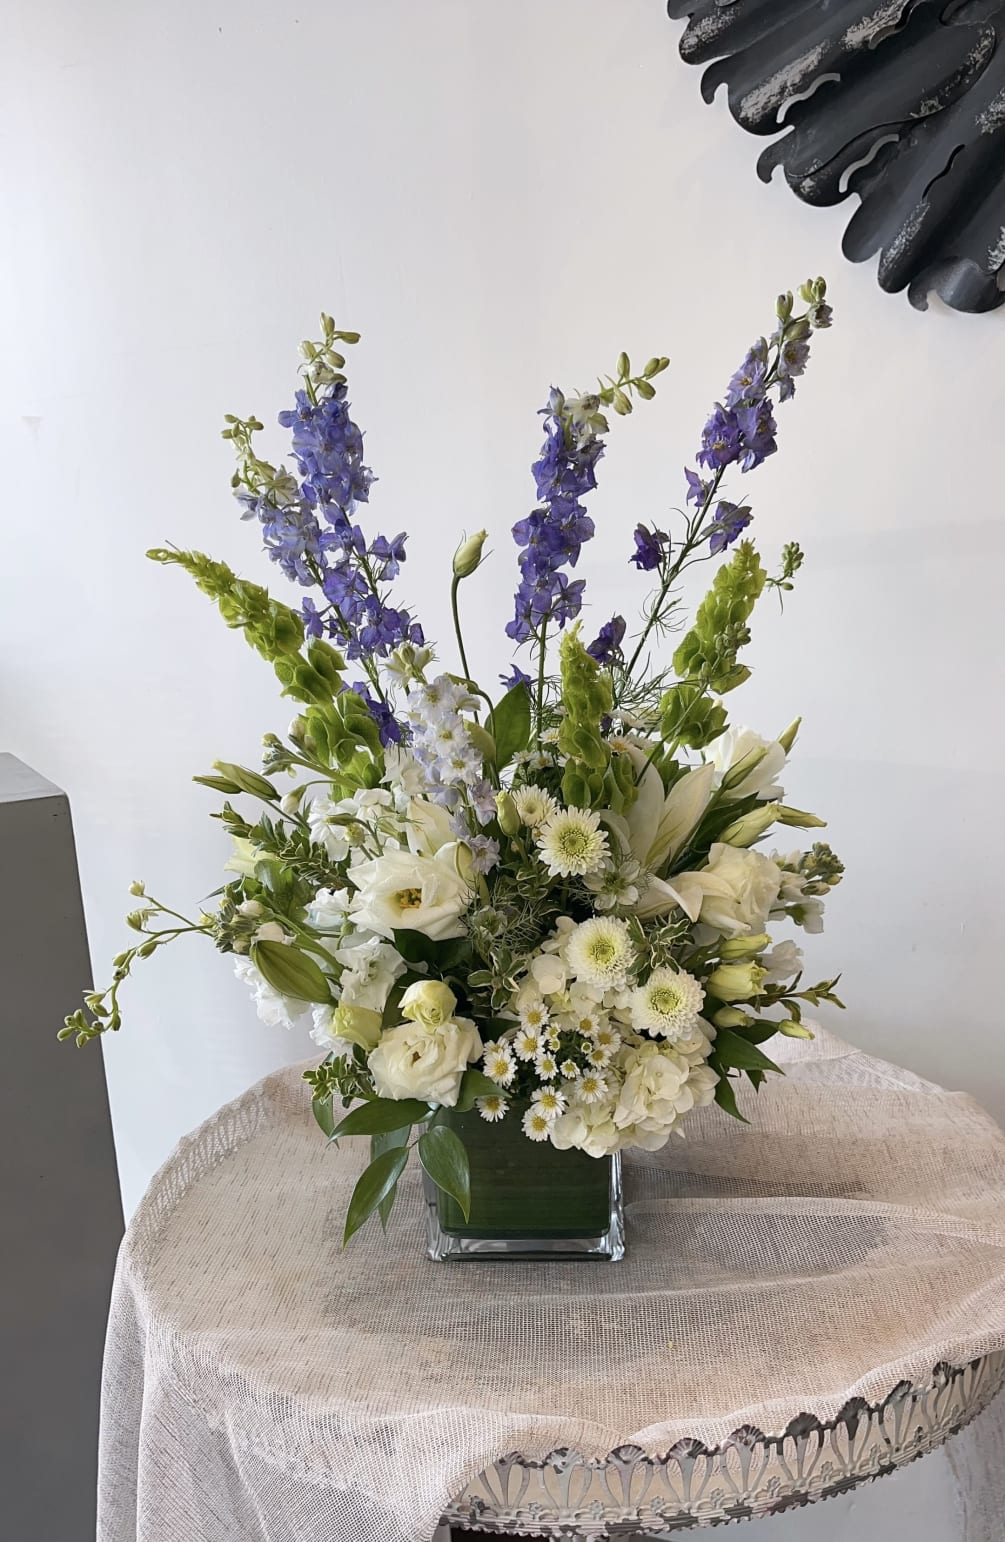 A lovely touch of lavender and white in a cube vase